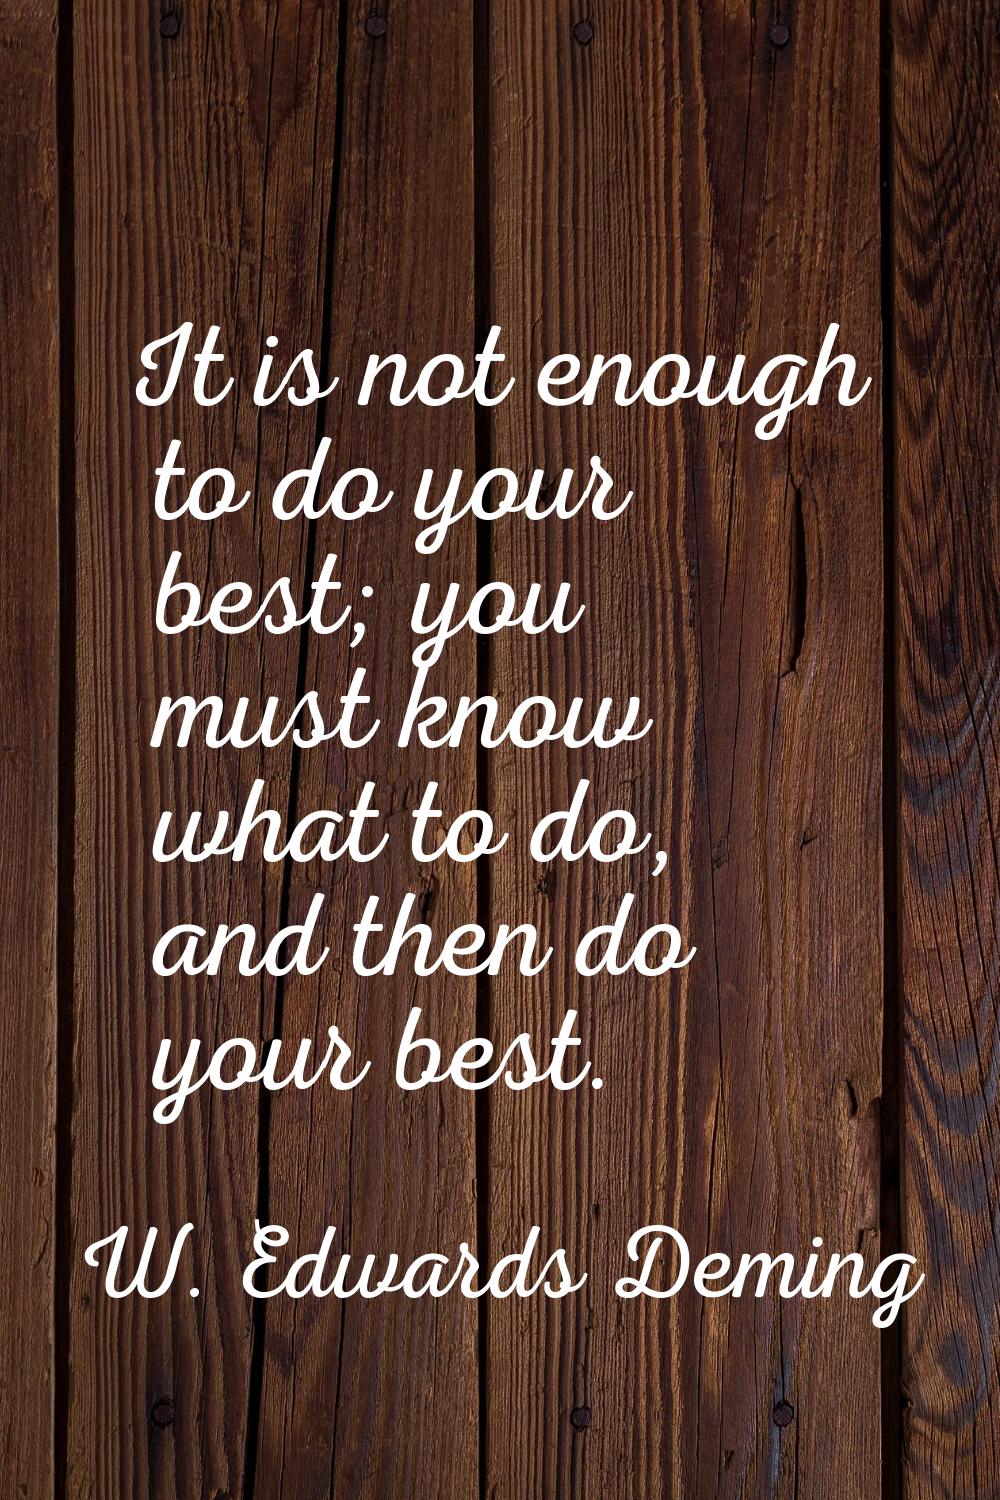 It is not enough to do your best; you must know what to do, and then do your best.